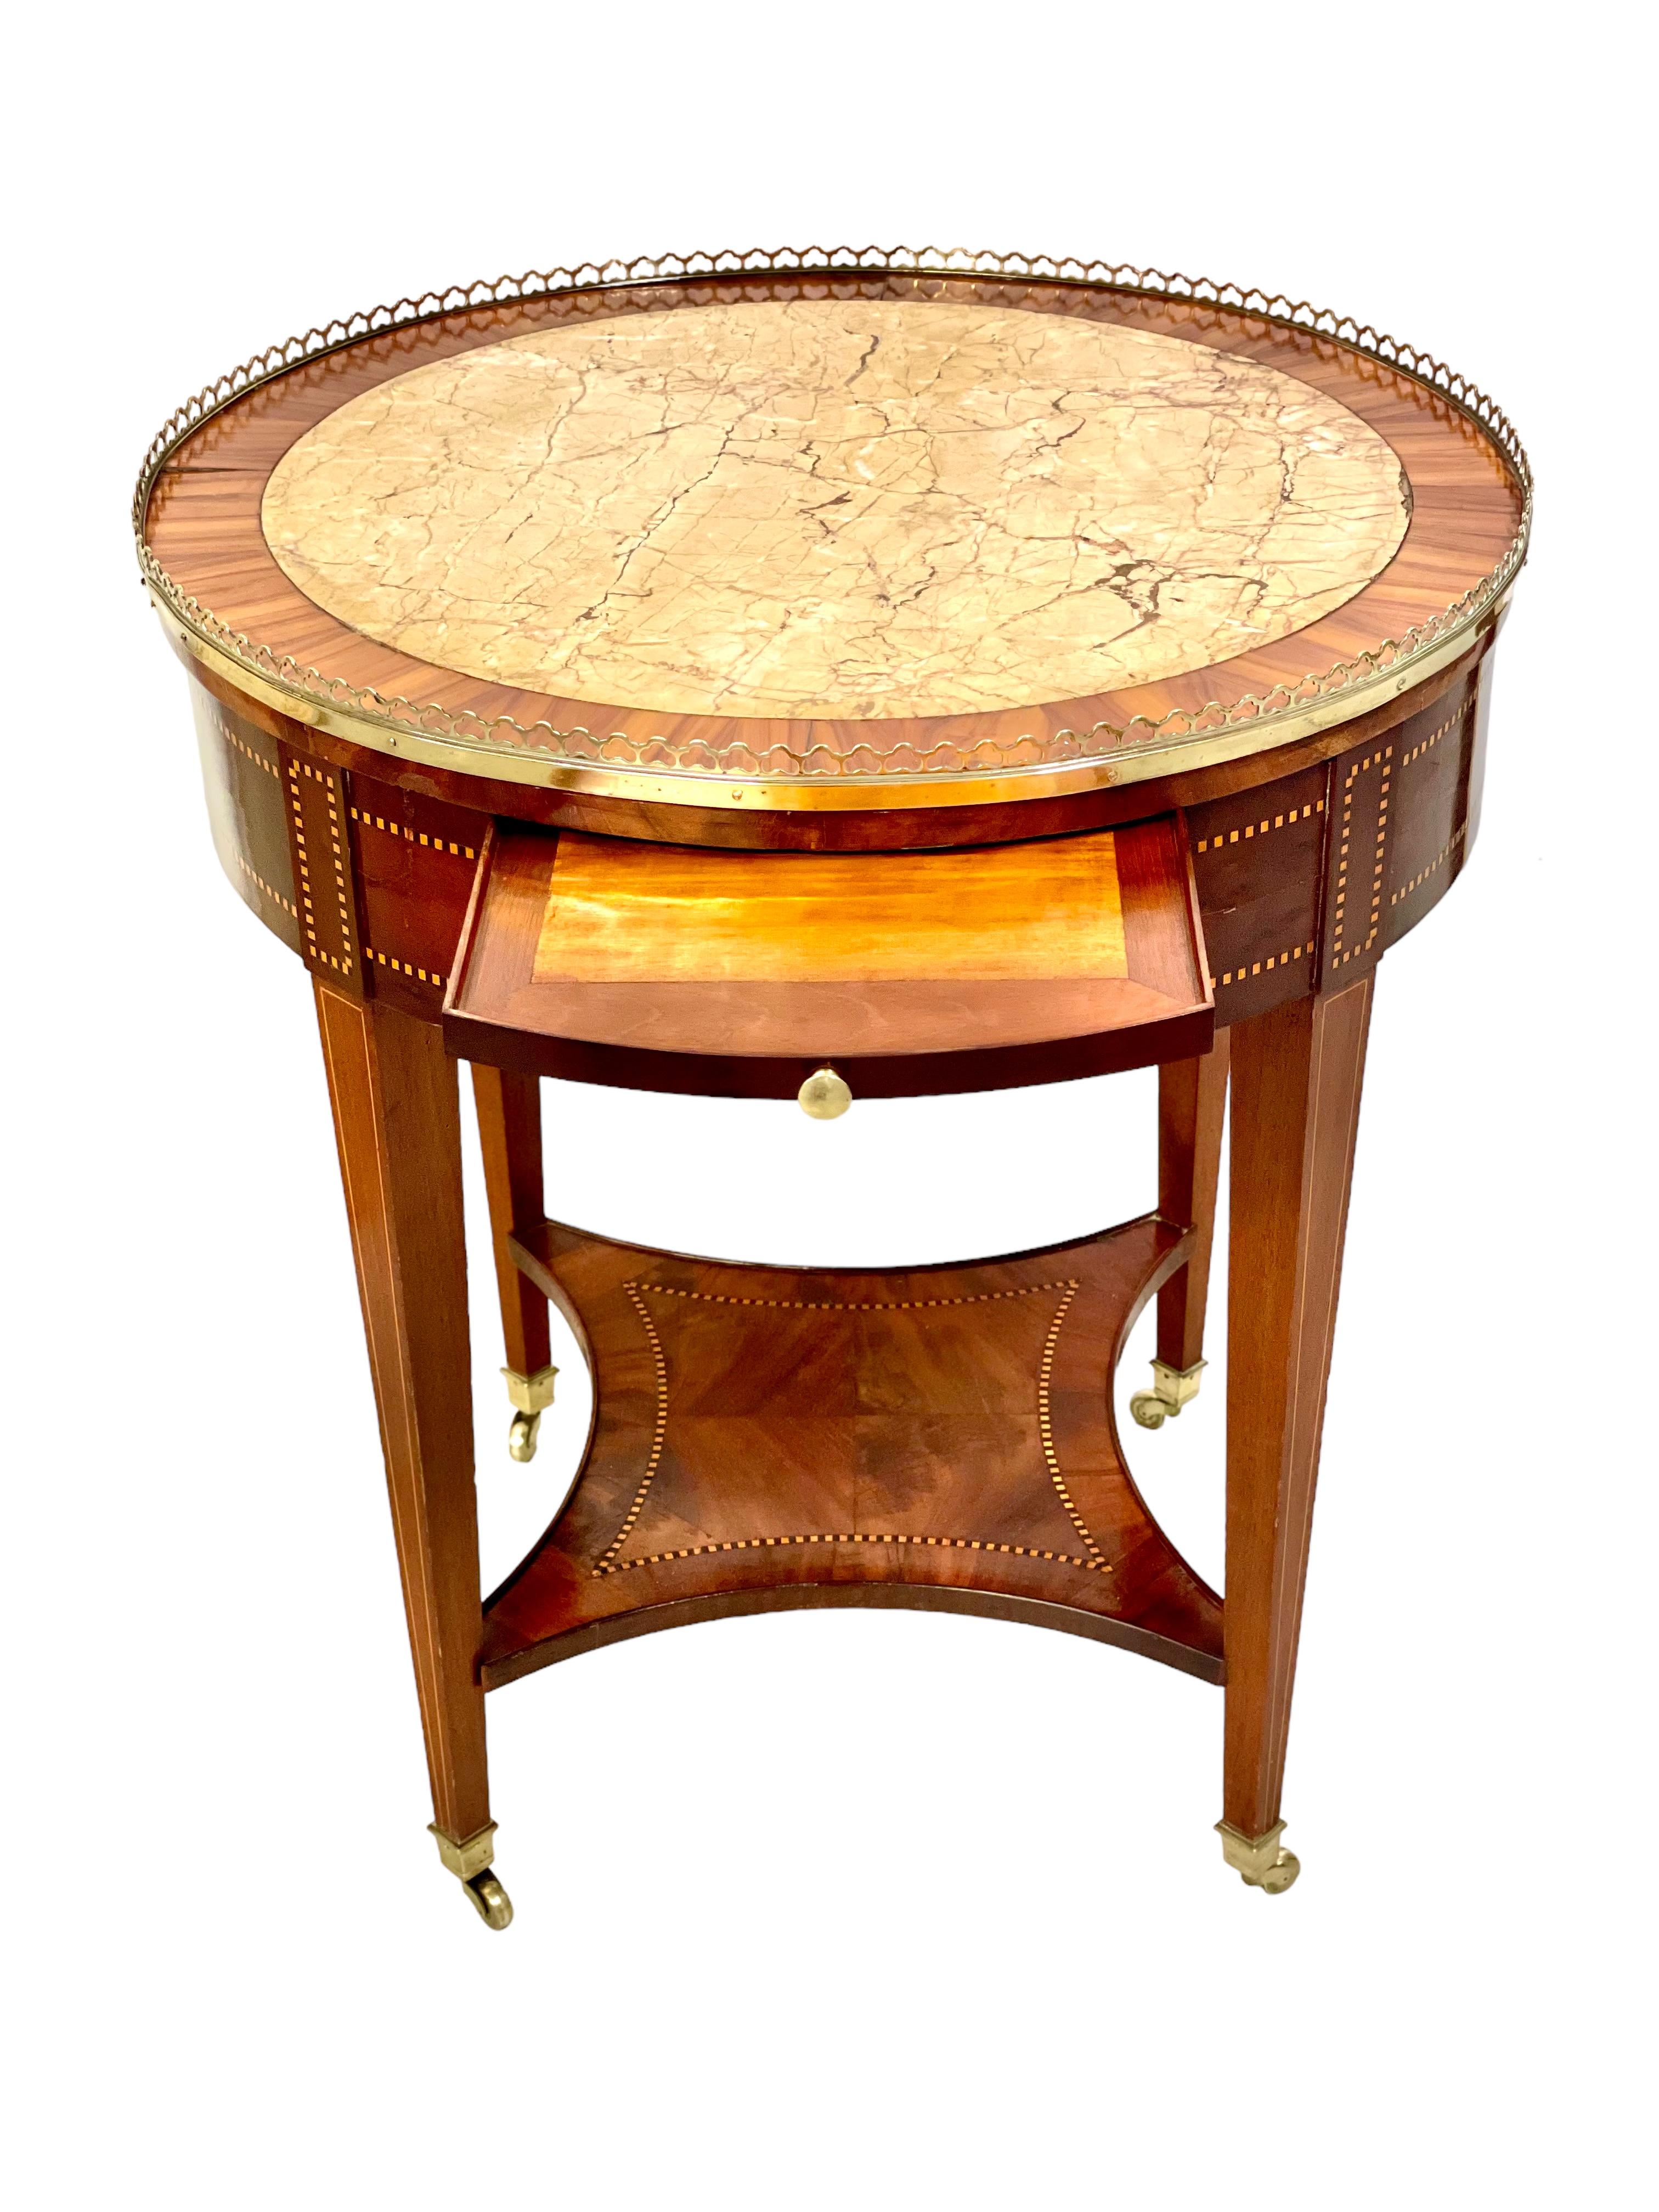 19th Century French Marquetry Inlaid Gueridon Table For Sale 3